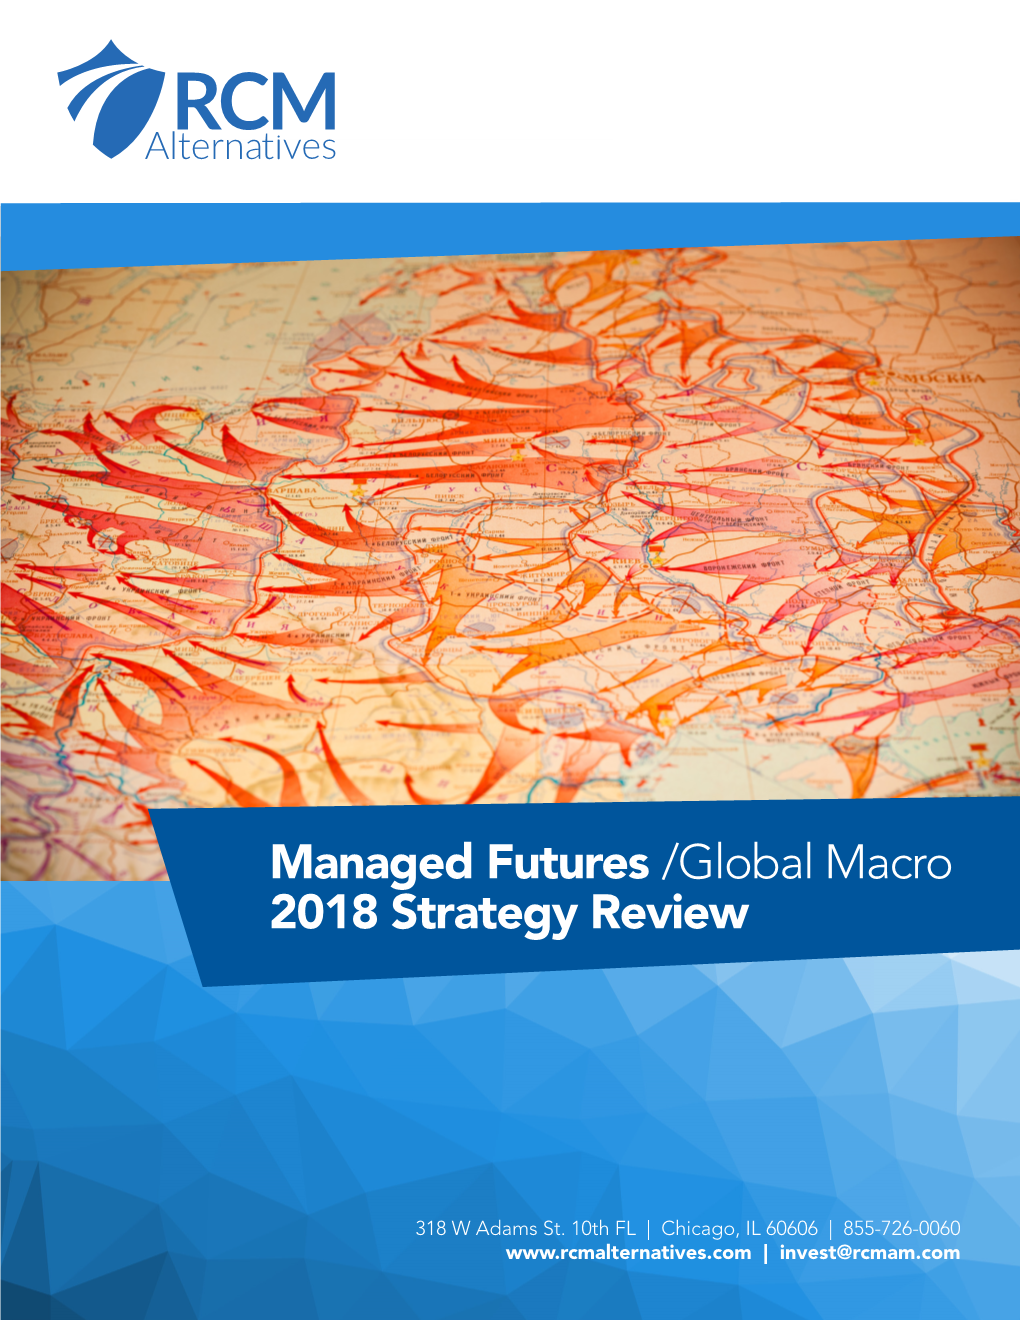 Managed Futures /Global Macro 2018 Strategy Review